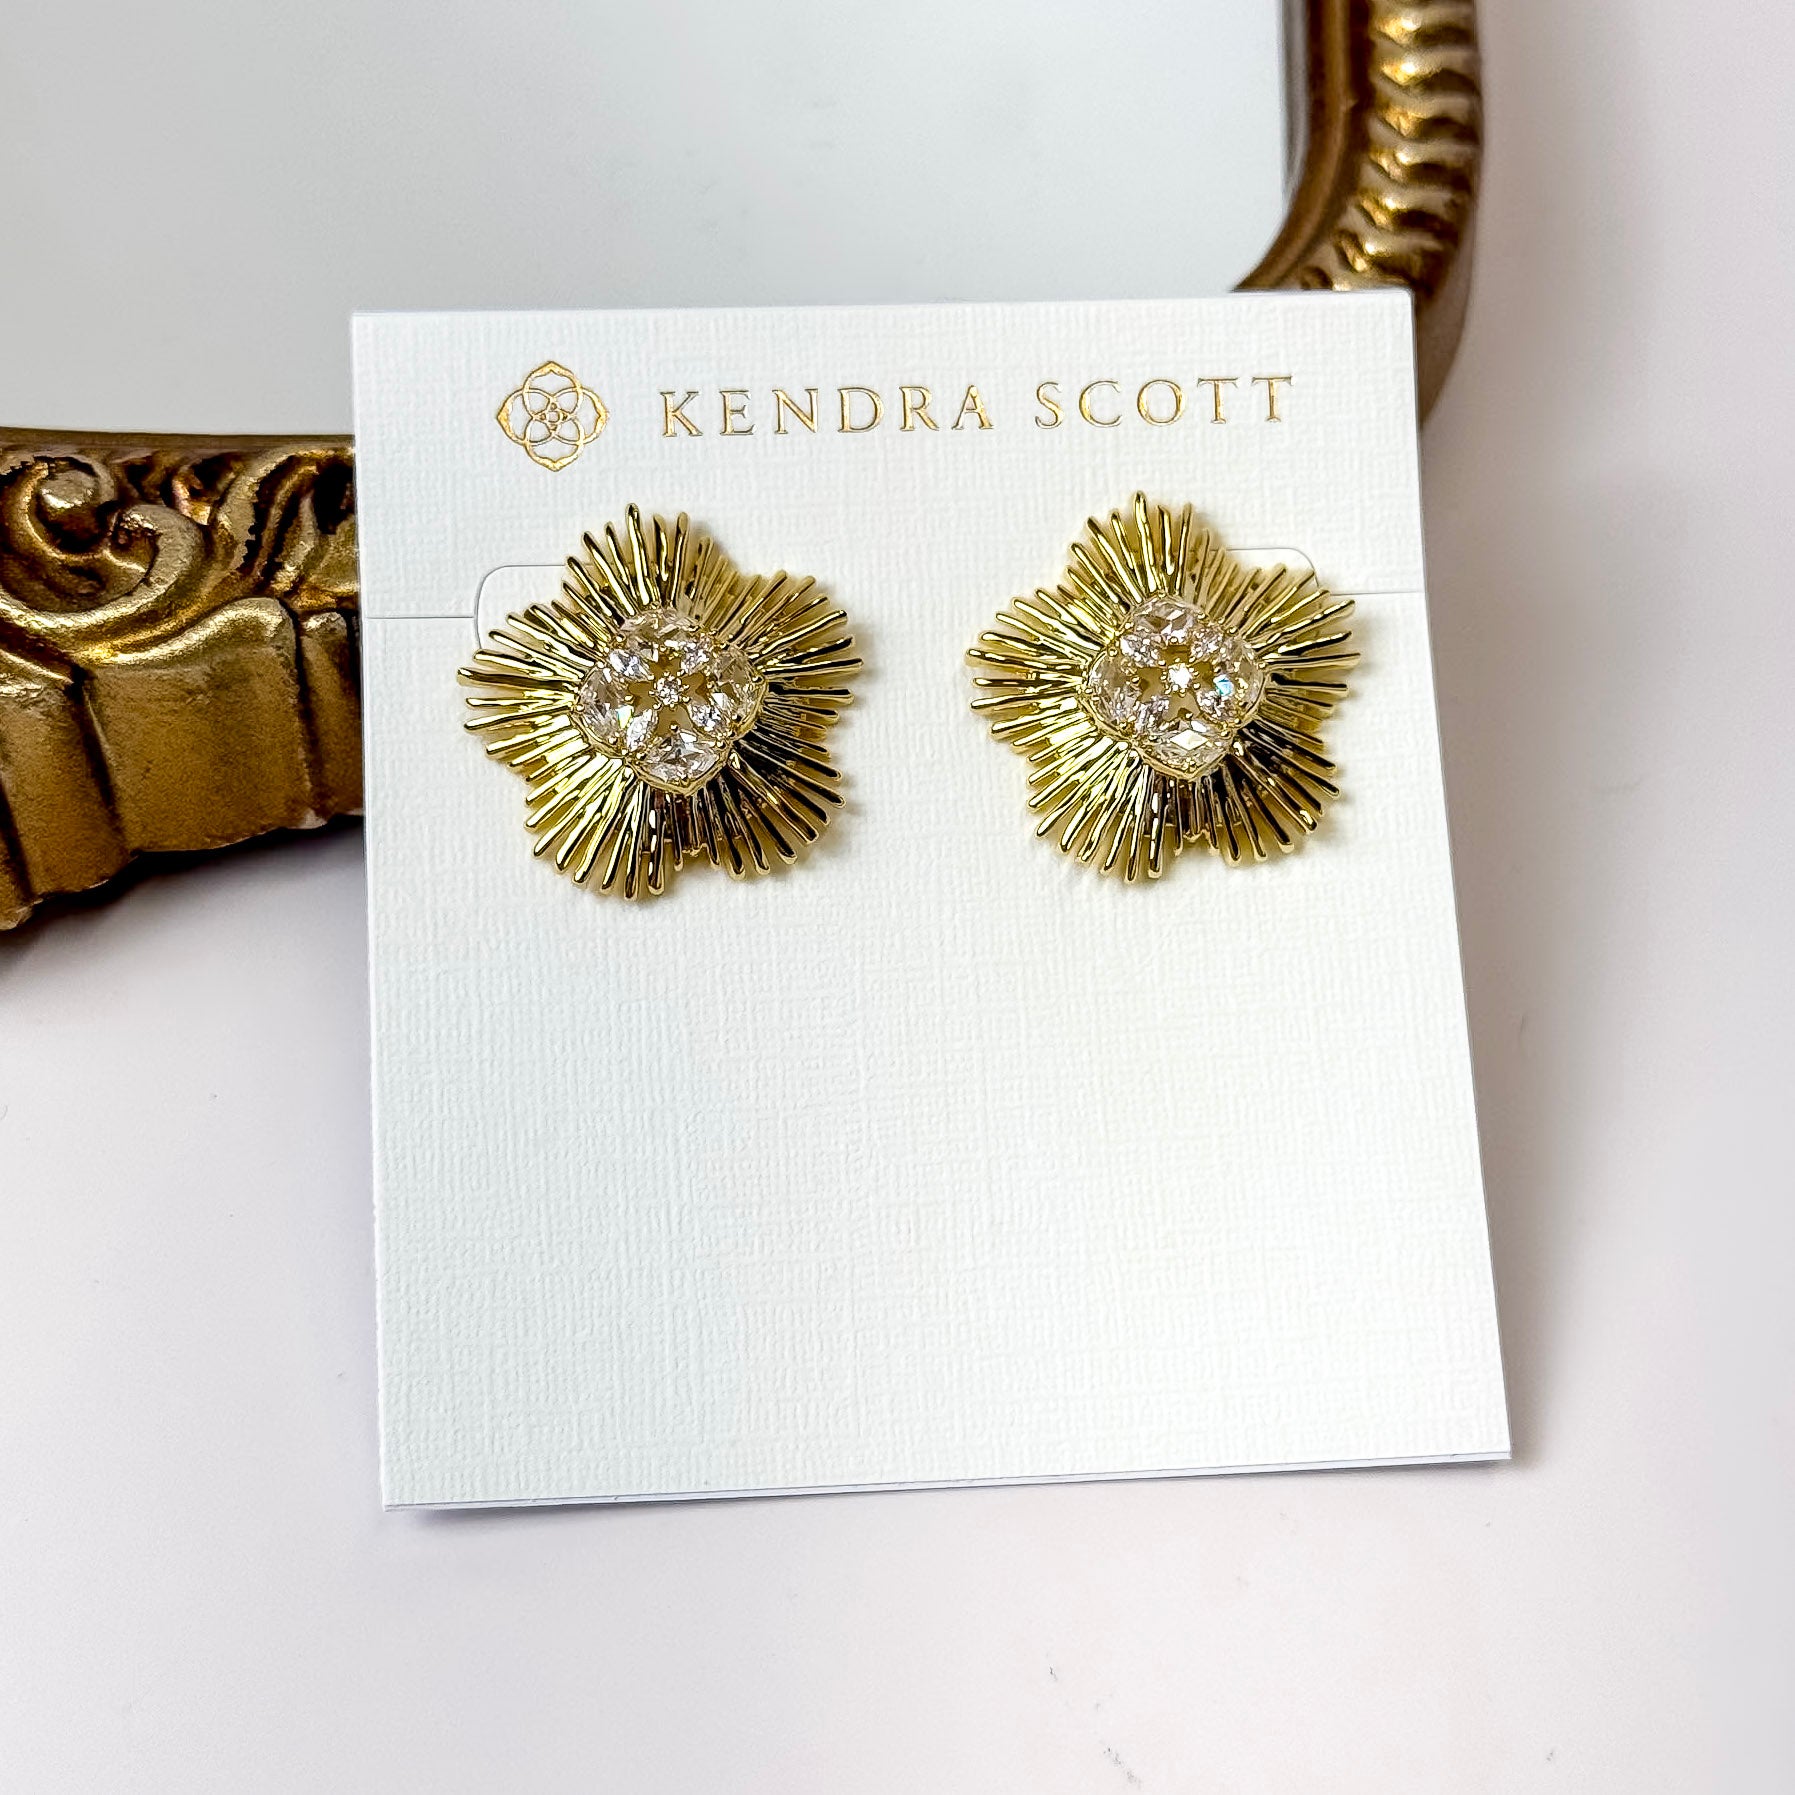 Kendra Scott | Dira Gold Crystal Statement Stud Earrings in White Crystal - Giddy Up Glamour Boutique